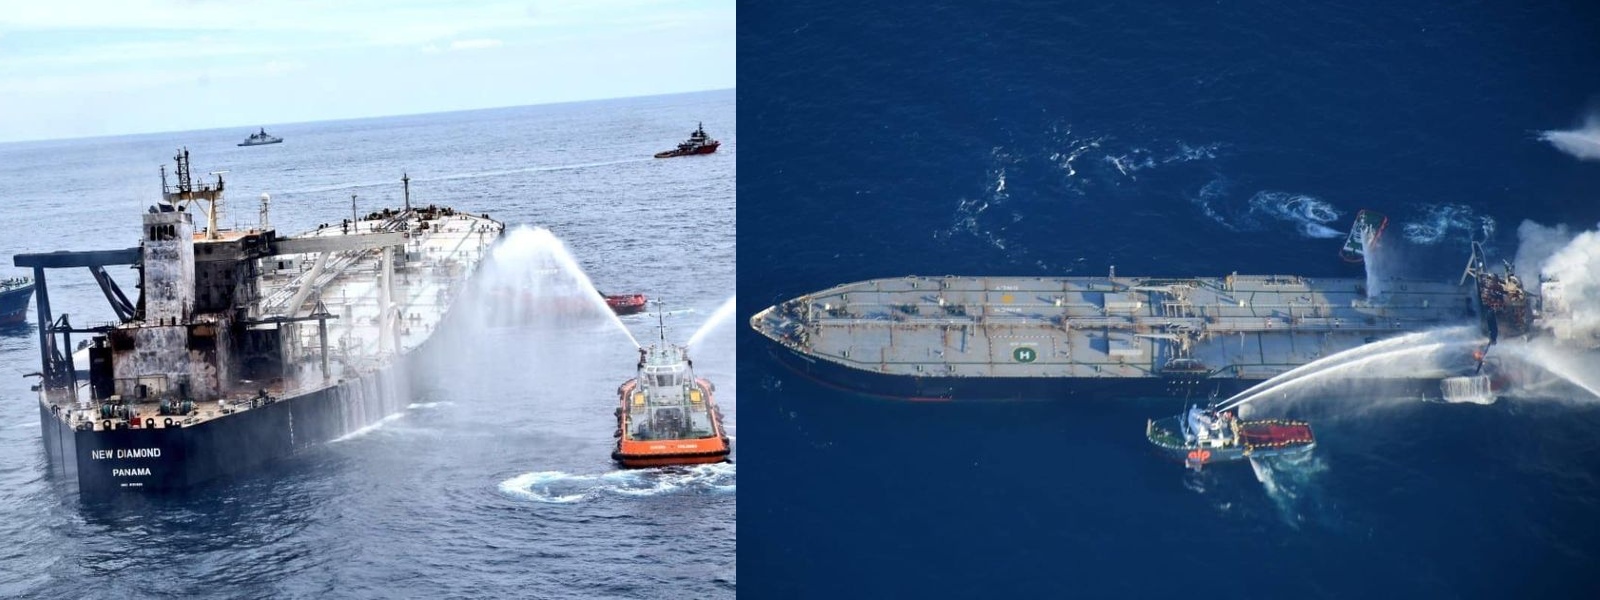 SLAF drops another 1000kg of DCP on to MT New Diamond to smother any onboard flames